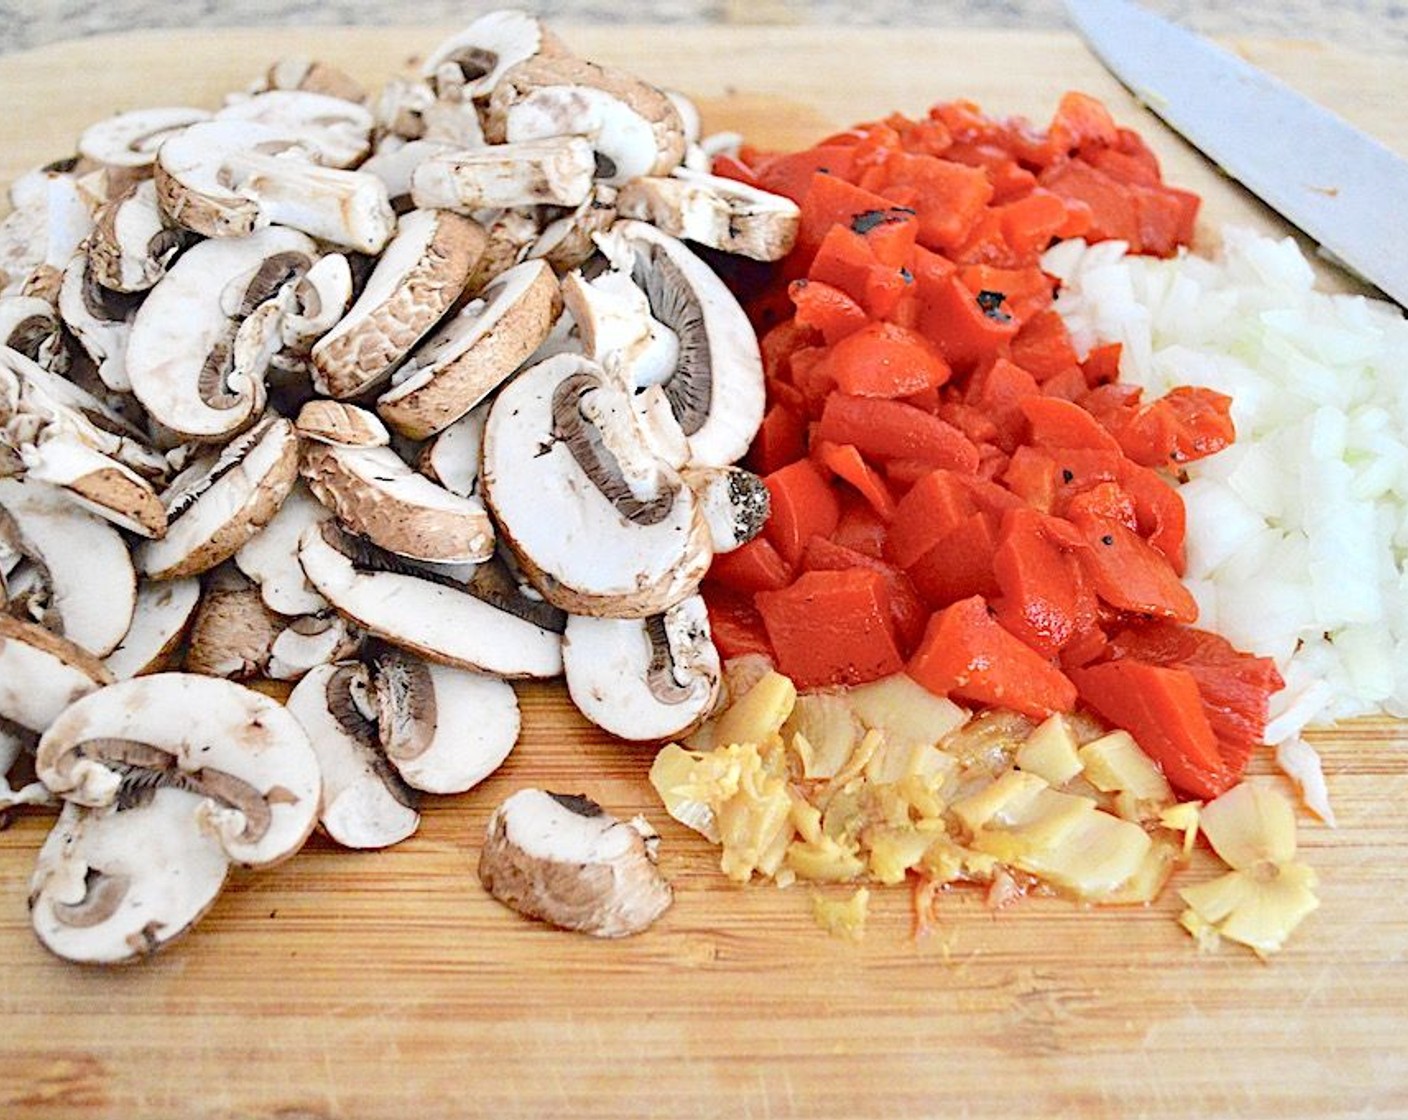 step 1 Into a large dutch oven or stock pot over medium-high heat, heat Olive Oil (1 dash). Add the Cremini Mushrooms (2 1/4 cups) and Jarred Roasted Red Peppers (1 jar), and let them soften for a couple of minutes.